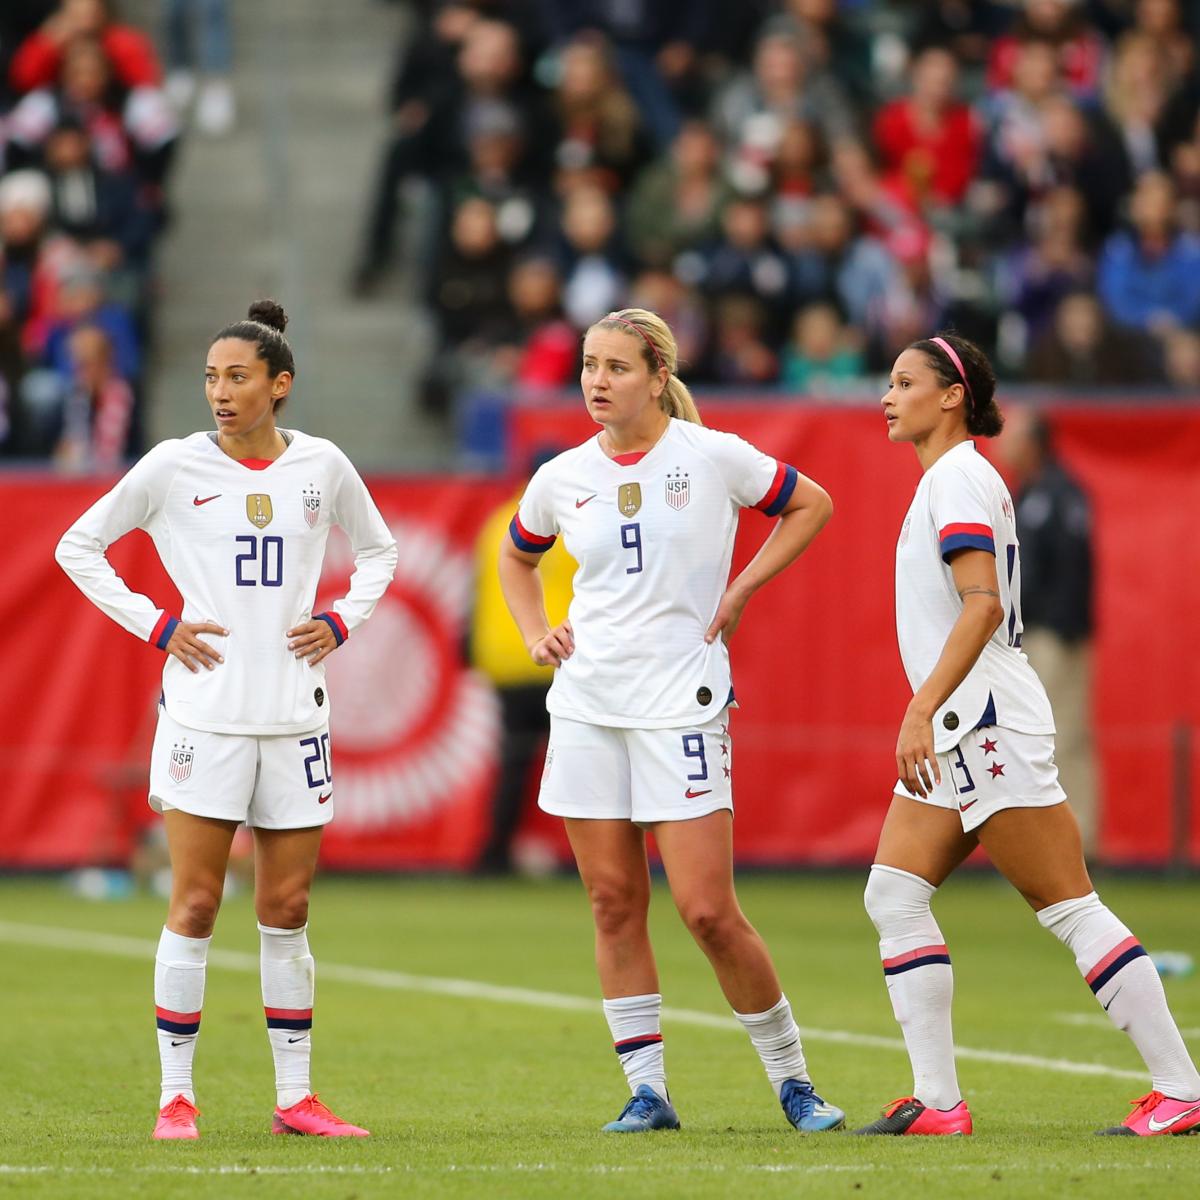 usa-vs-england-women-s-soccer-2020-shebelieves-cup-schedule-live